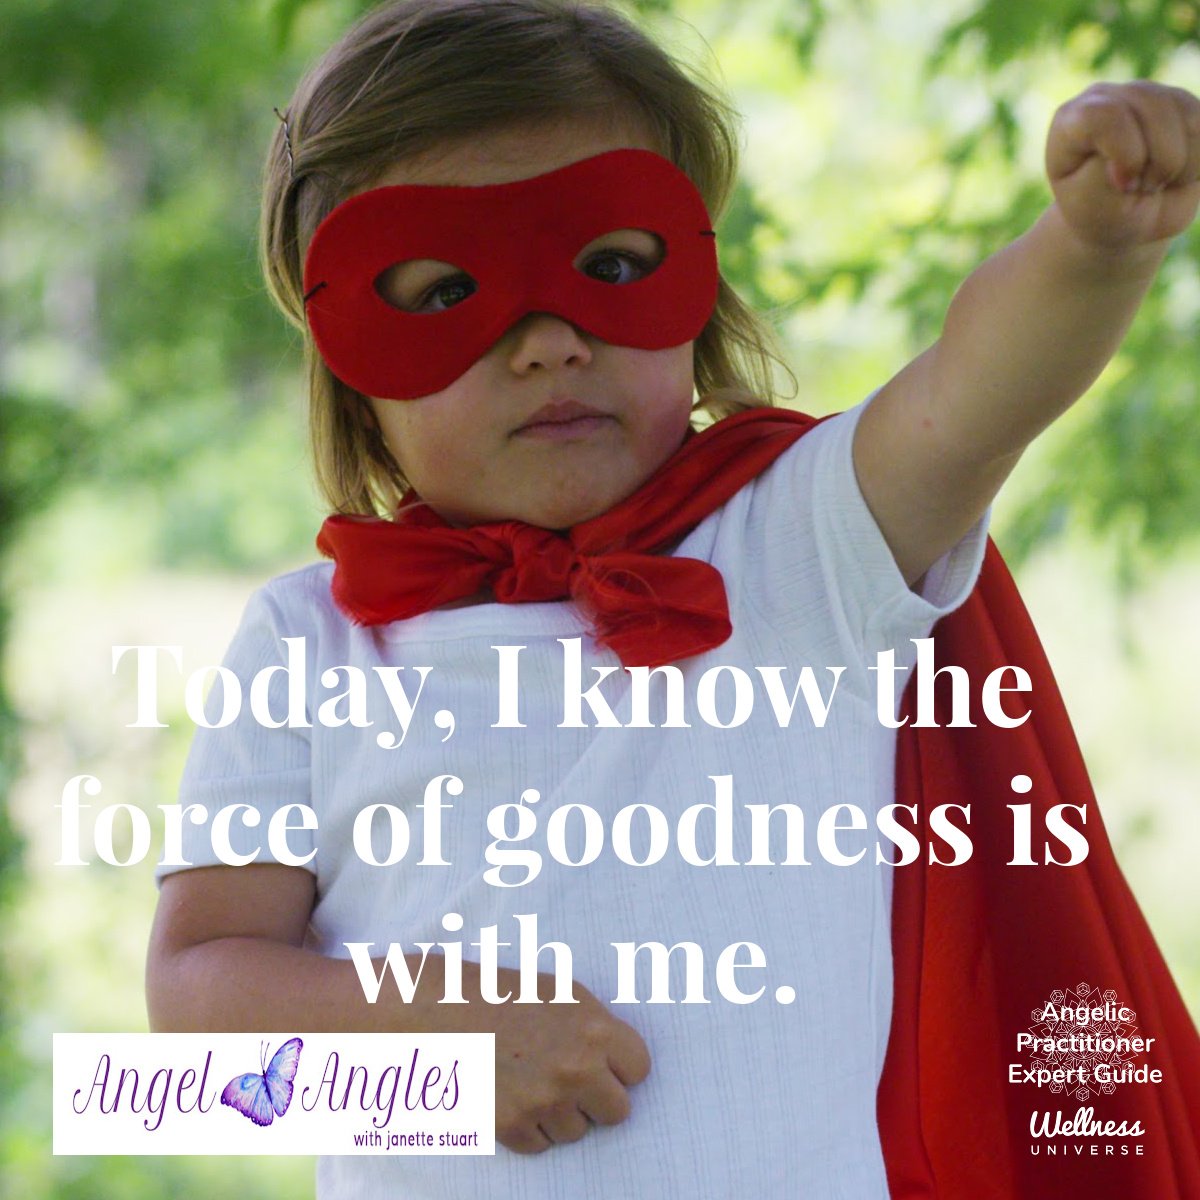 Hello and welcome to your Angel Affirmation and May the 4th be with you! 

Today, I know the force of goodness is with me. 

Tagging @JackieMacDonald who responded earlier that this affirmation was one of her favorites. 

Blessings of love, joy, and 